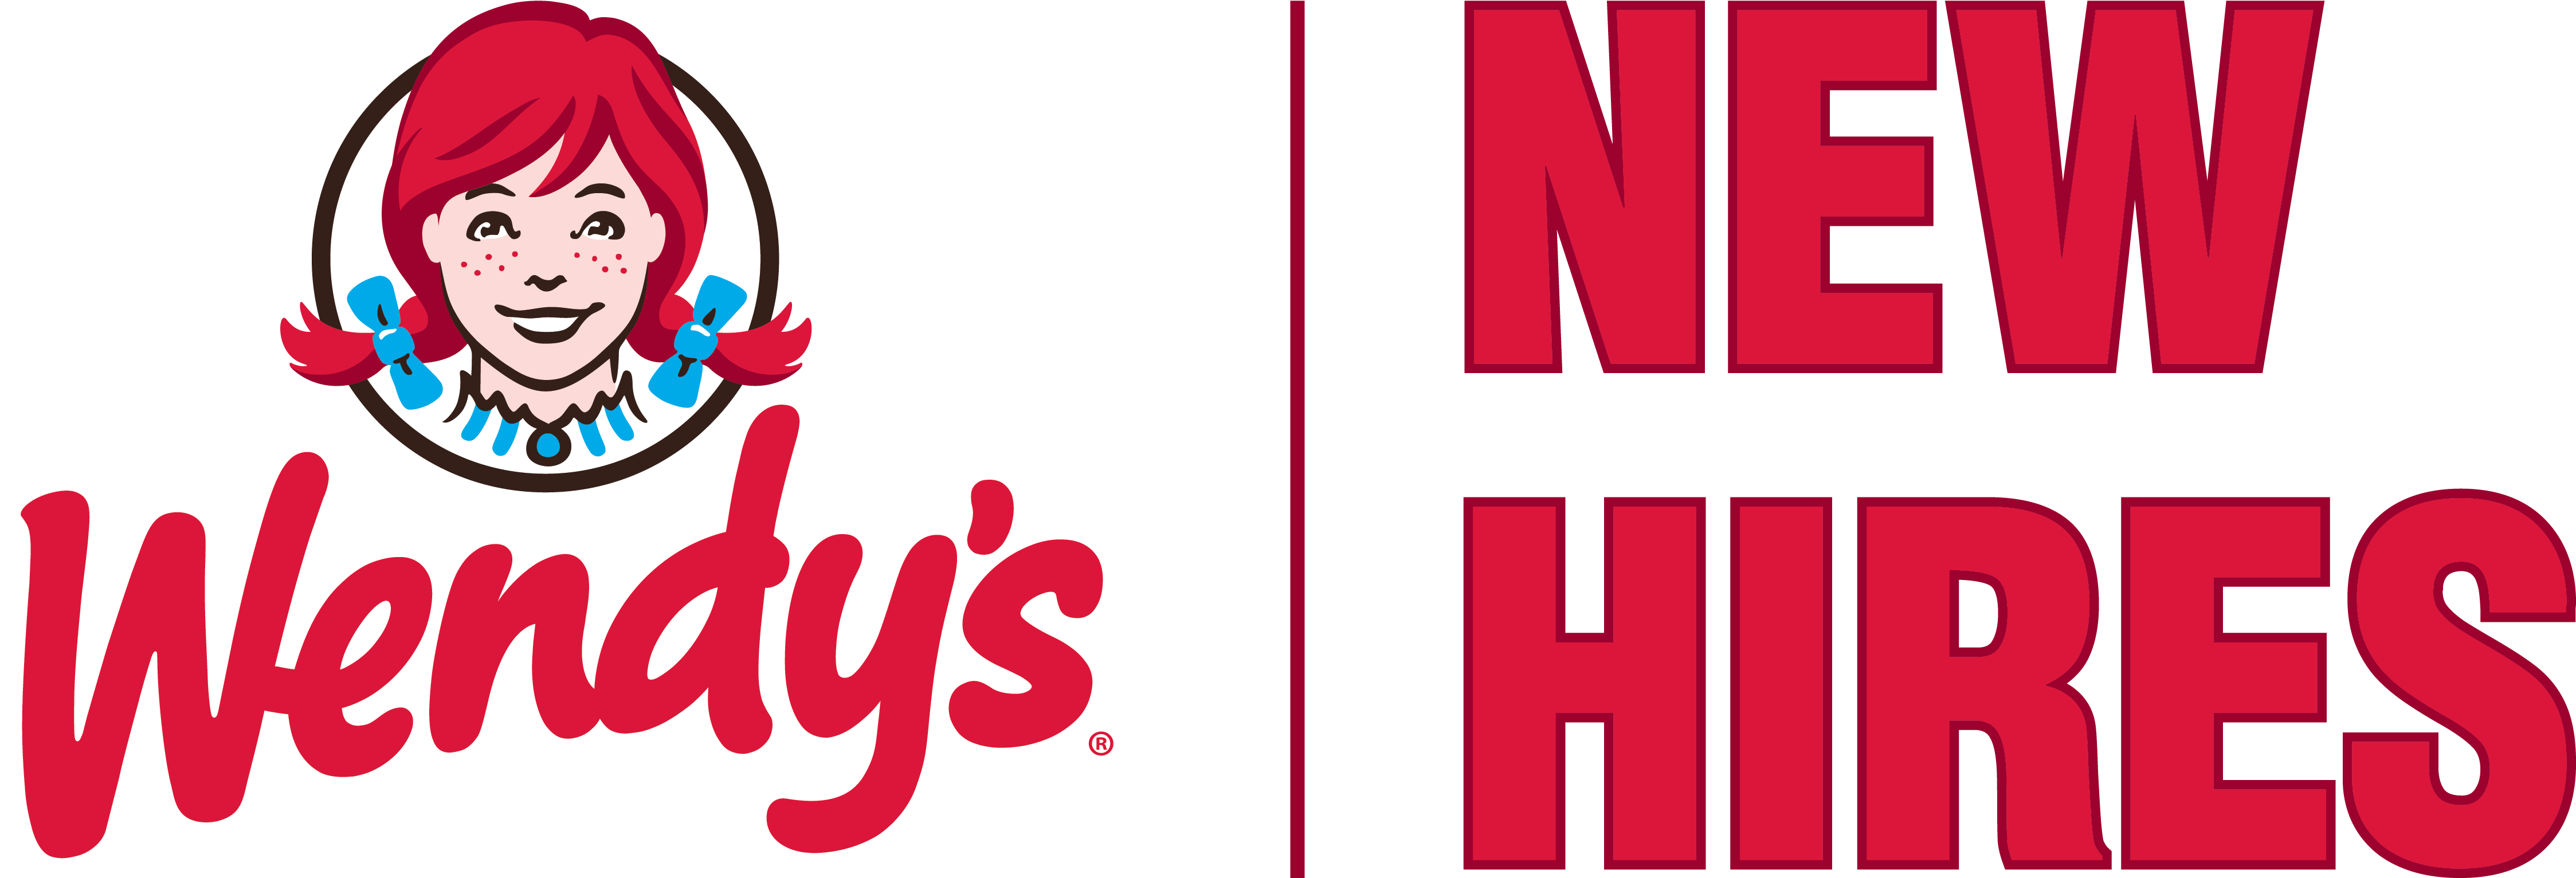 Wendy’s PNG HD Quality